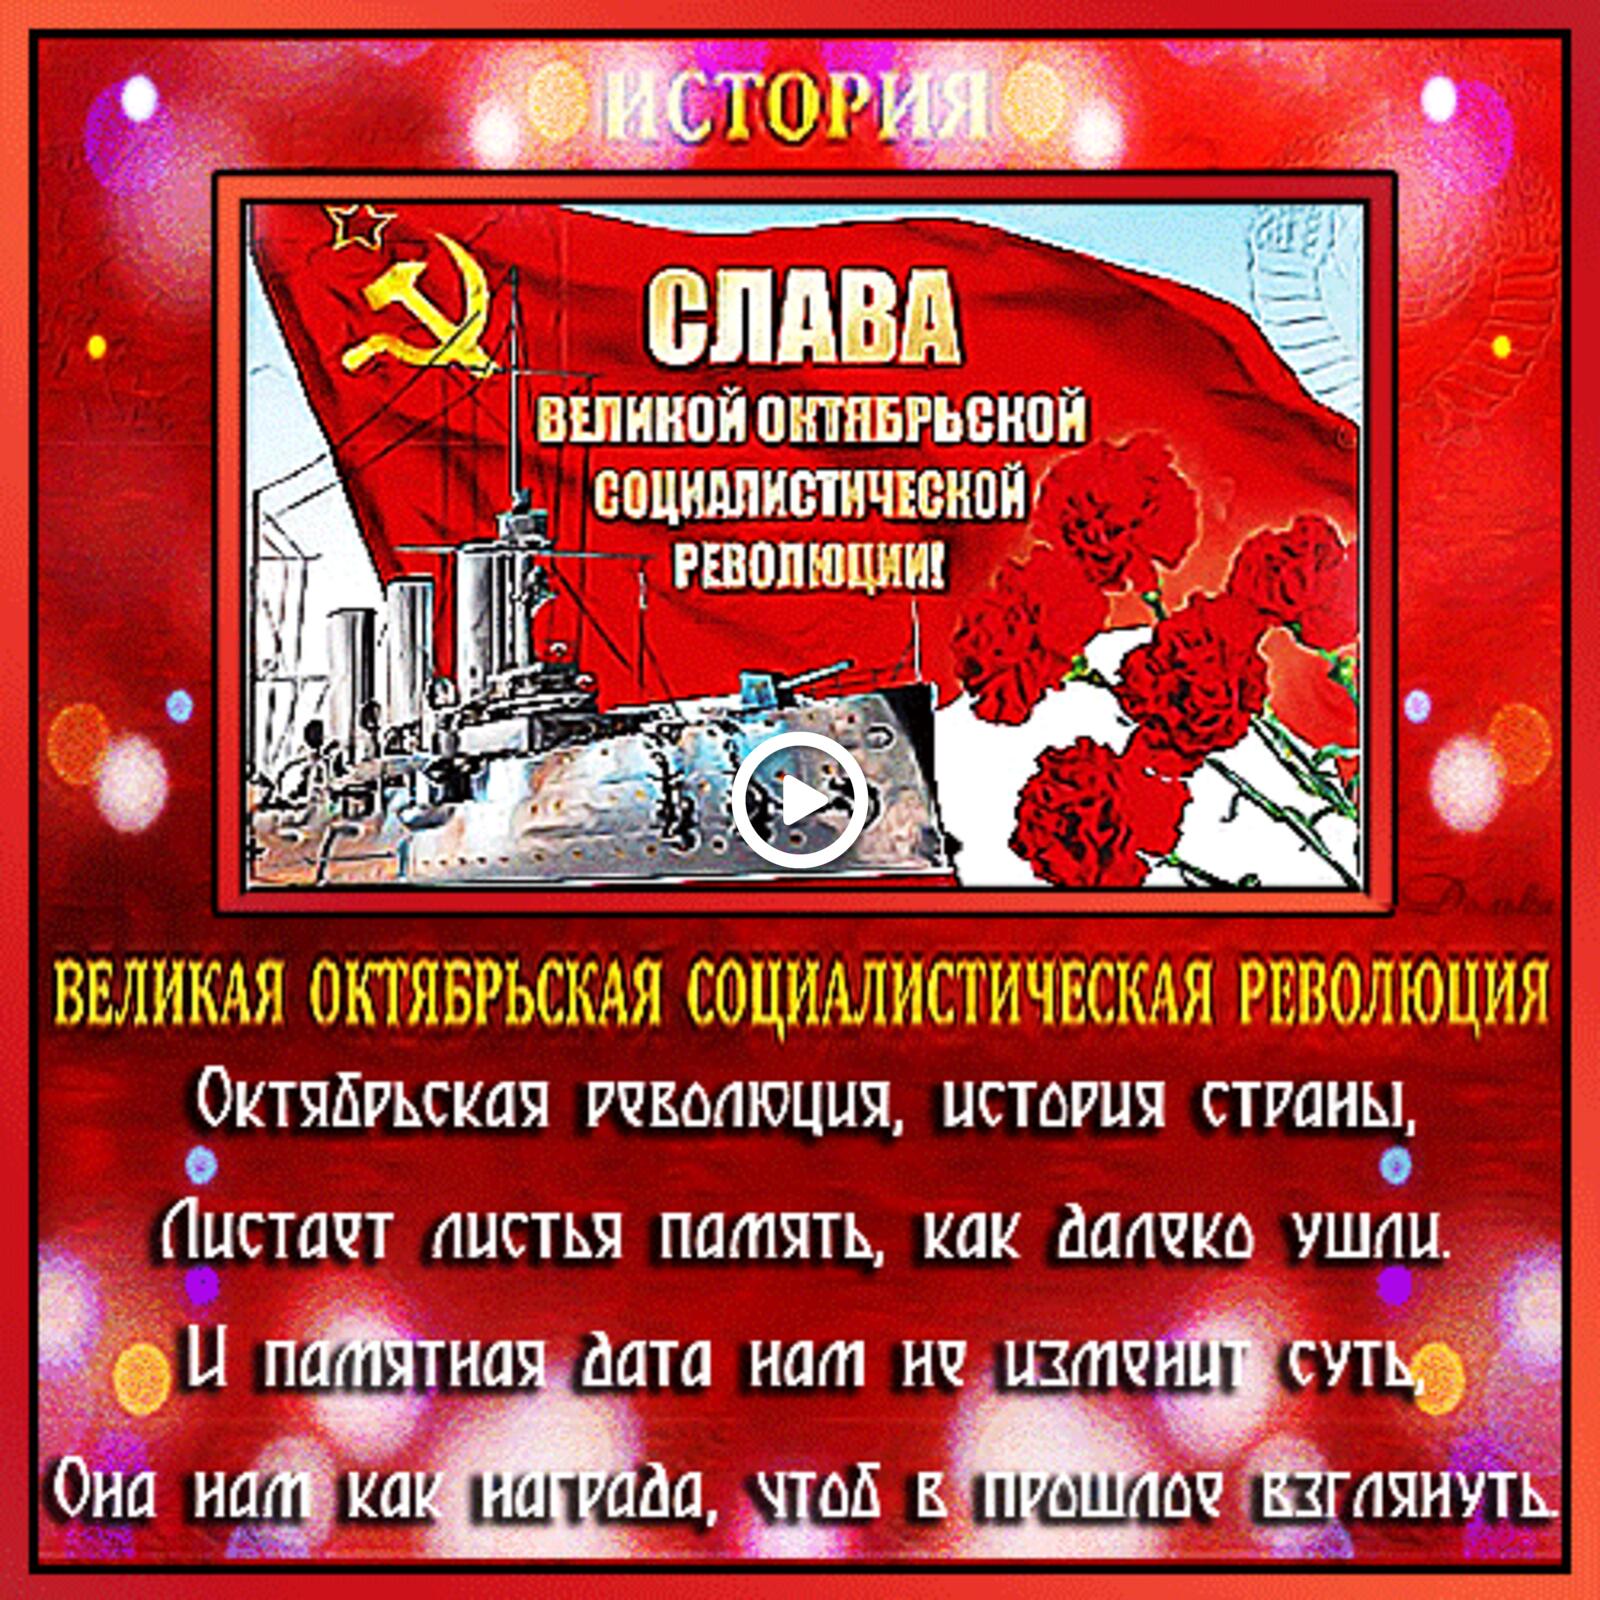 A postcard on the subject of happy october revolution day flowers postcard for free